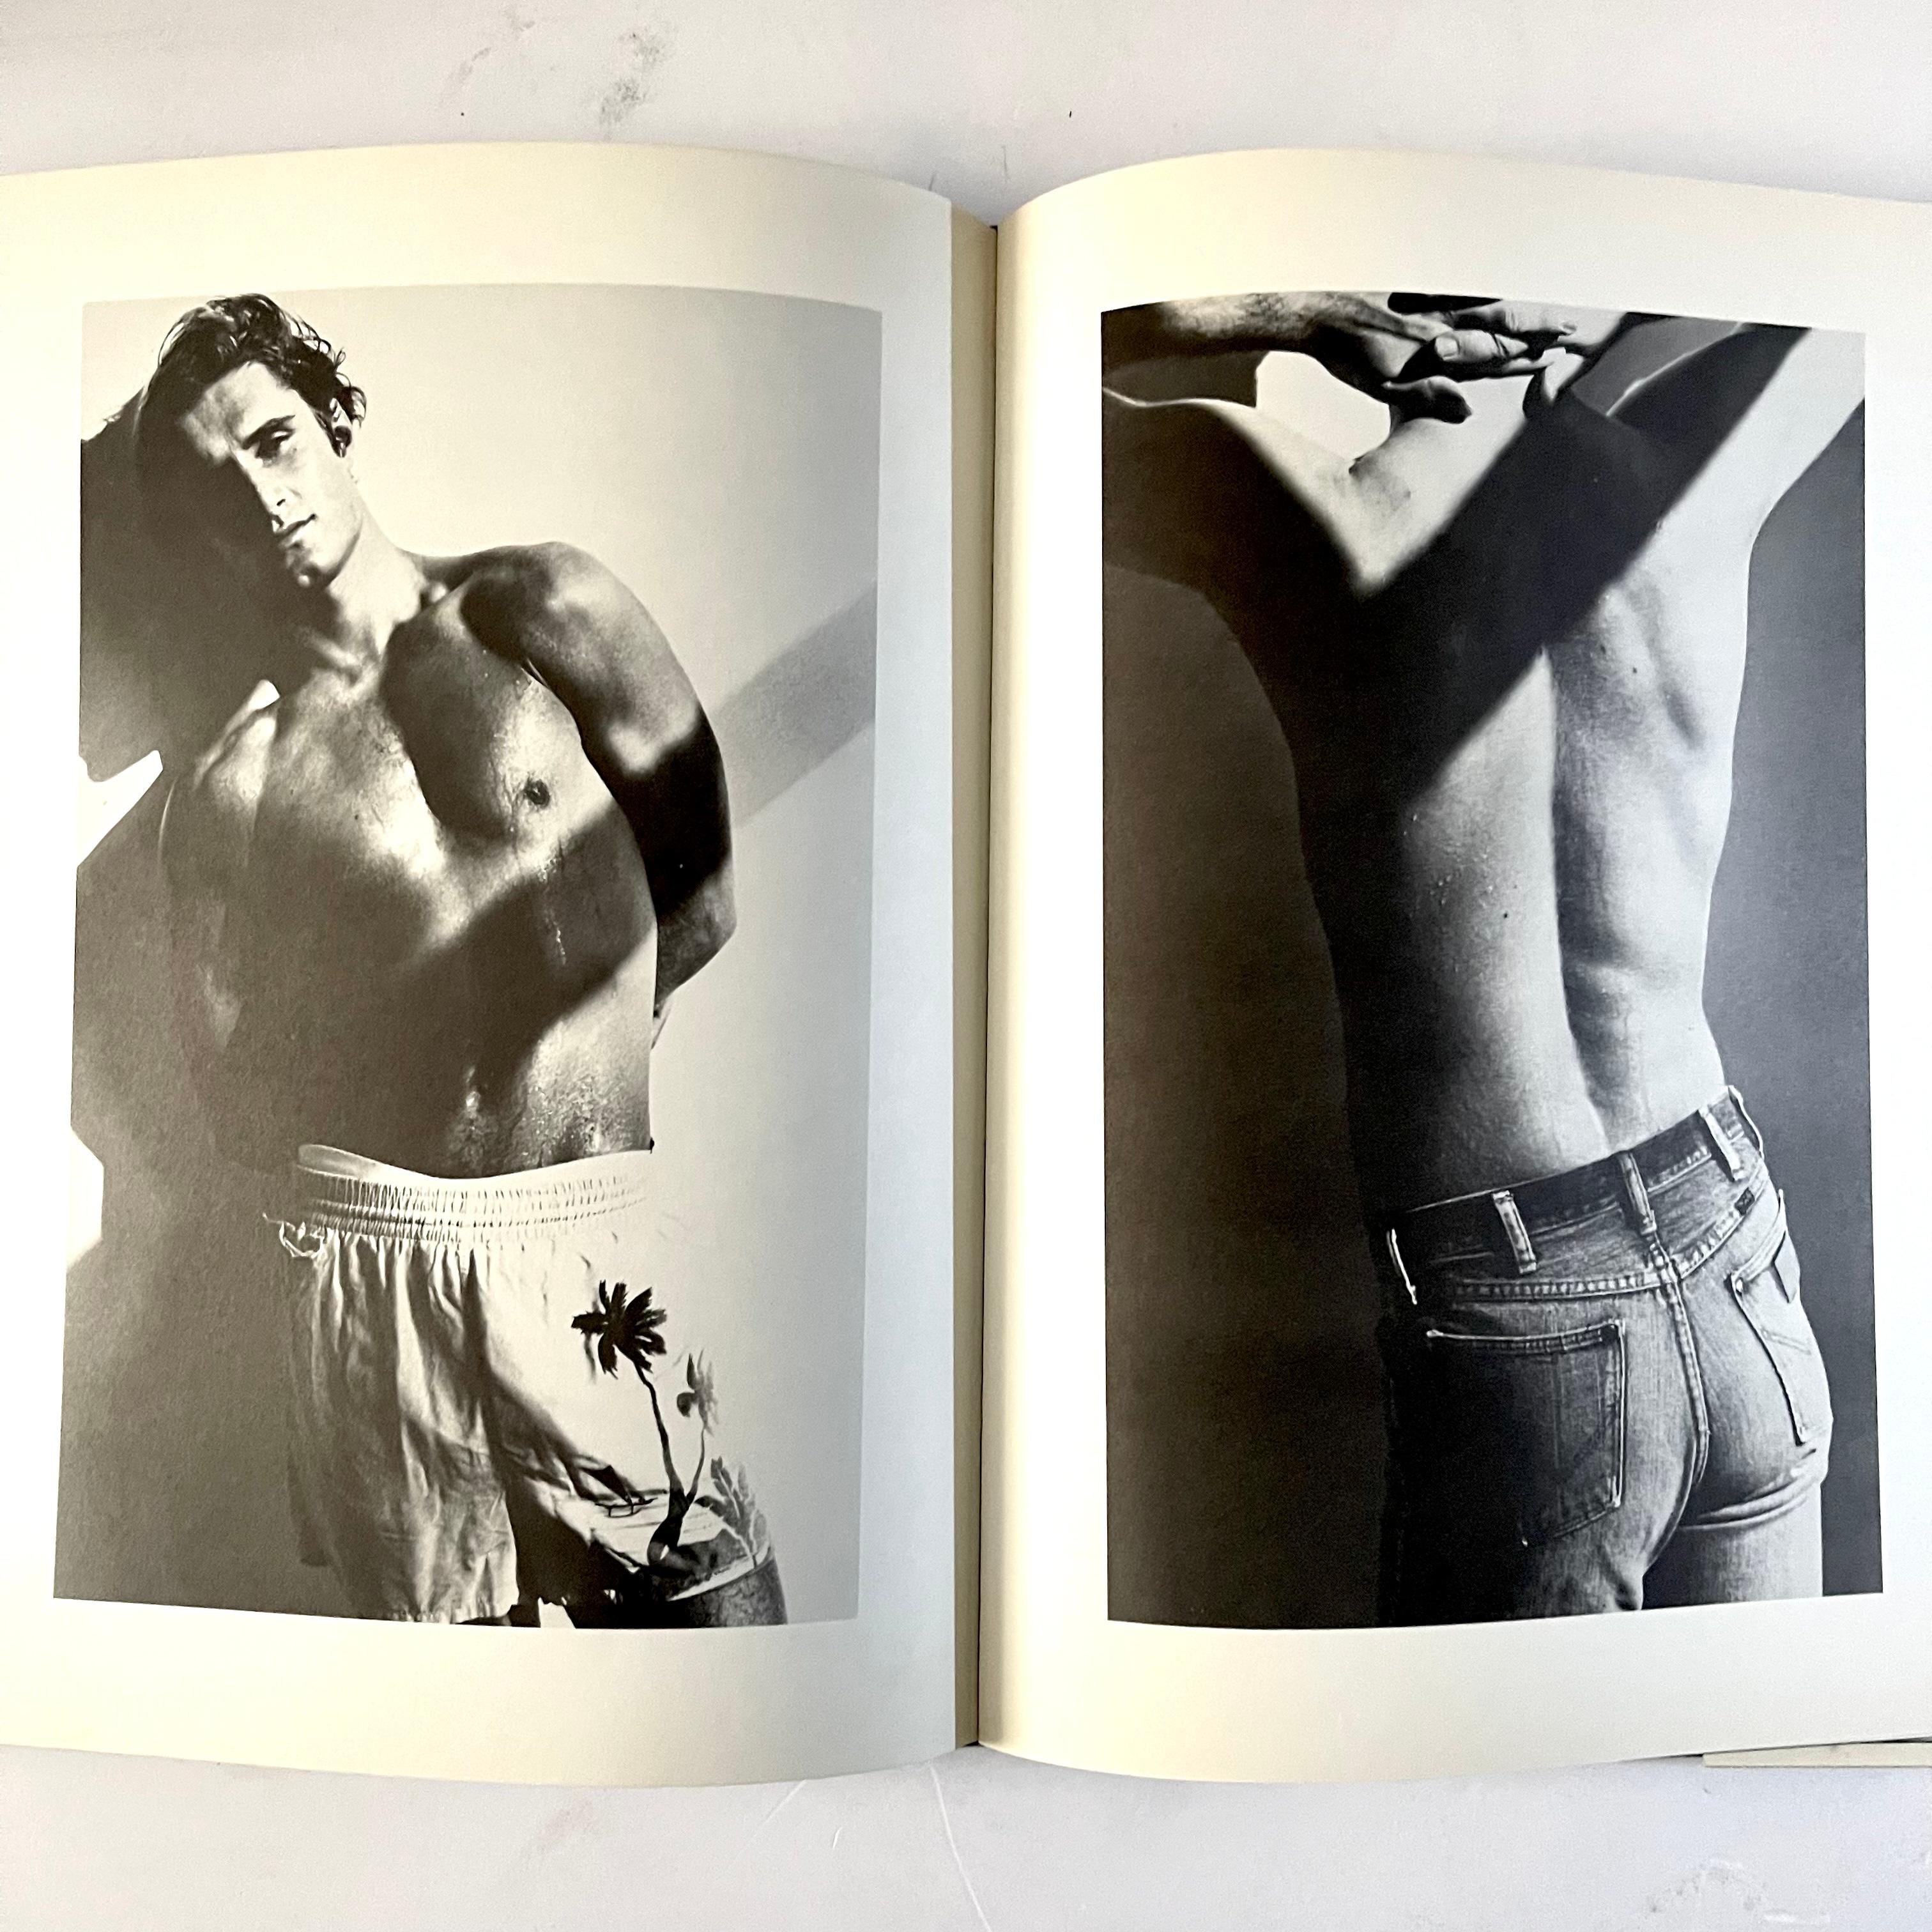 First US edition published by Hawthorn New York 1977

Looking Good; the first book ever to feature Bruce Weber’s photograph and of course it’s a men’s grooming book! Strong jaw-lines, a section on bronzer, wet powerful arms, avoiding genital odour